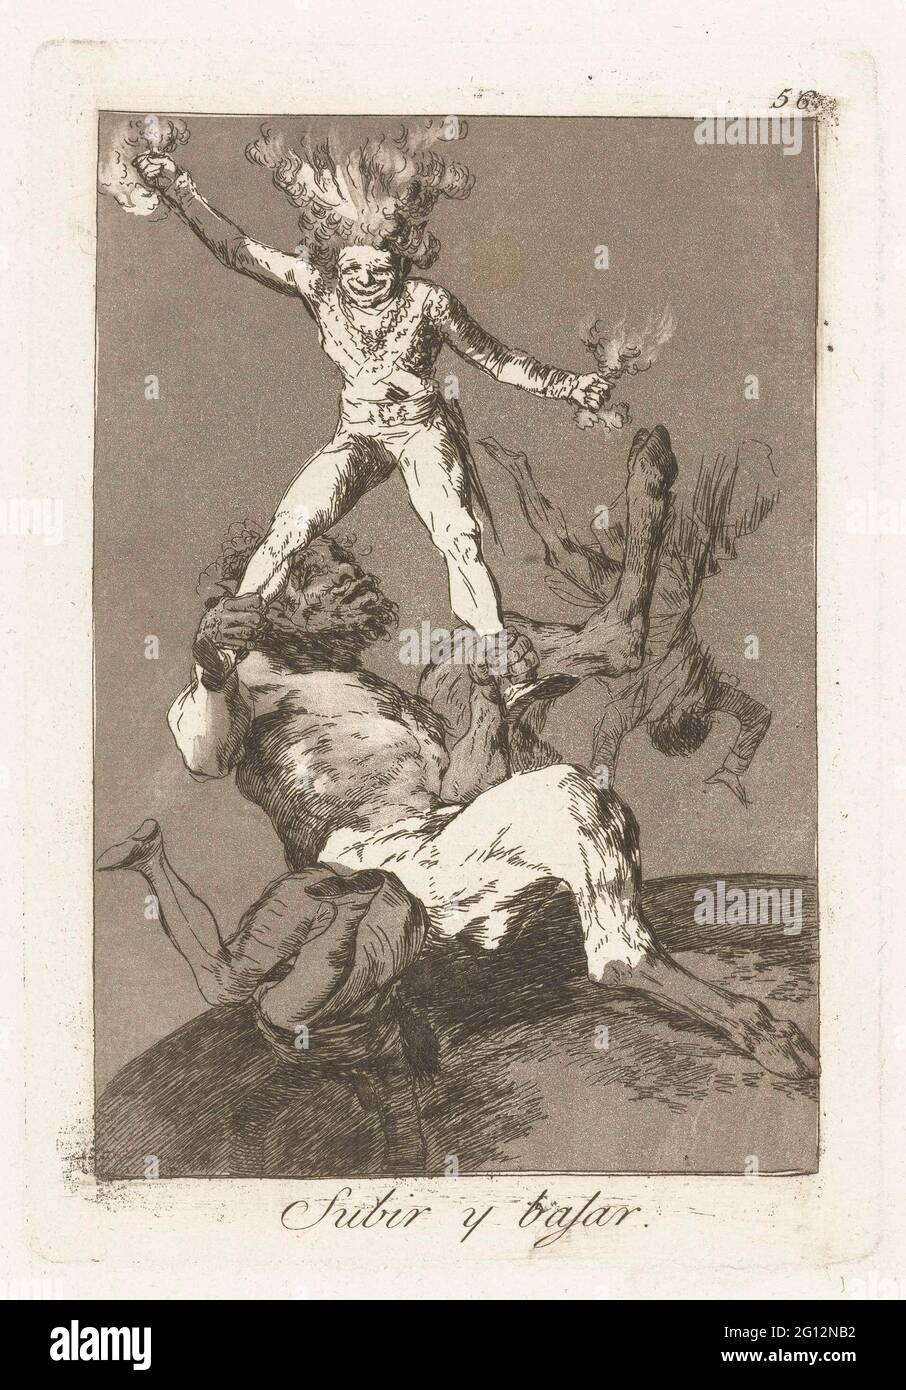 Rise and fall; Subir y bajar; Los Caprichos. A man in a military costume rises and is held by his legs by a Sater. From his head and hands comes smoke. Two other men fall down. Twenty-sixth print from the Los Caprichos series. Stock Photo